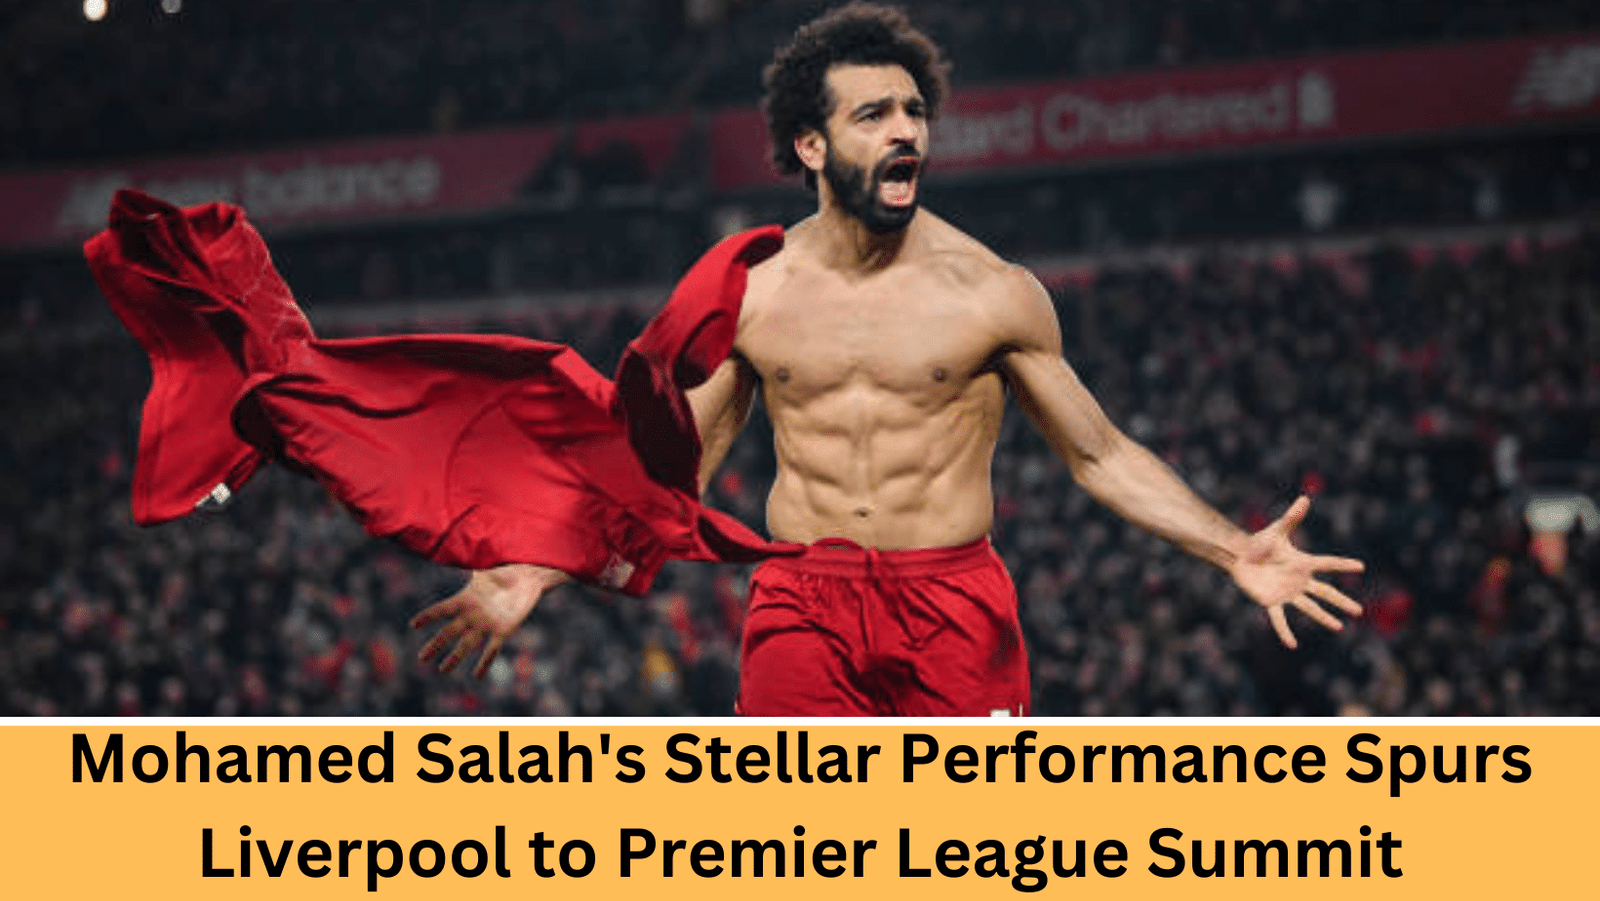 Mohamed Salah Shines in Liverpool's Triumph